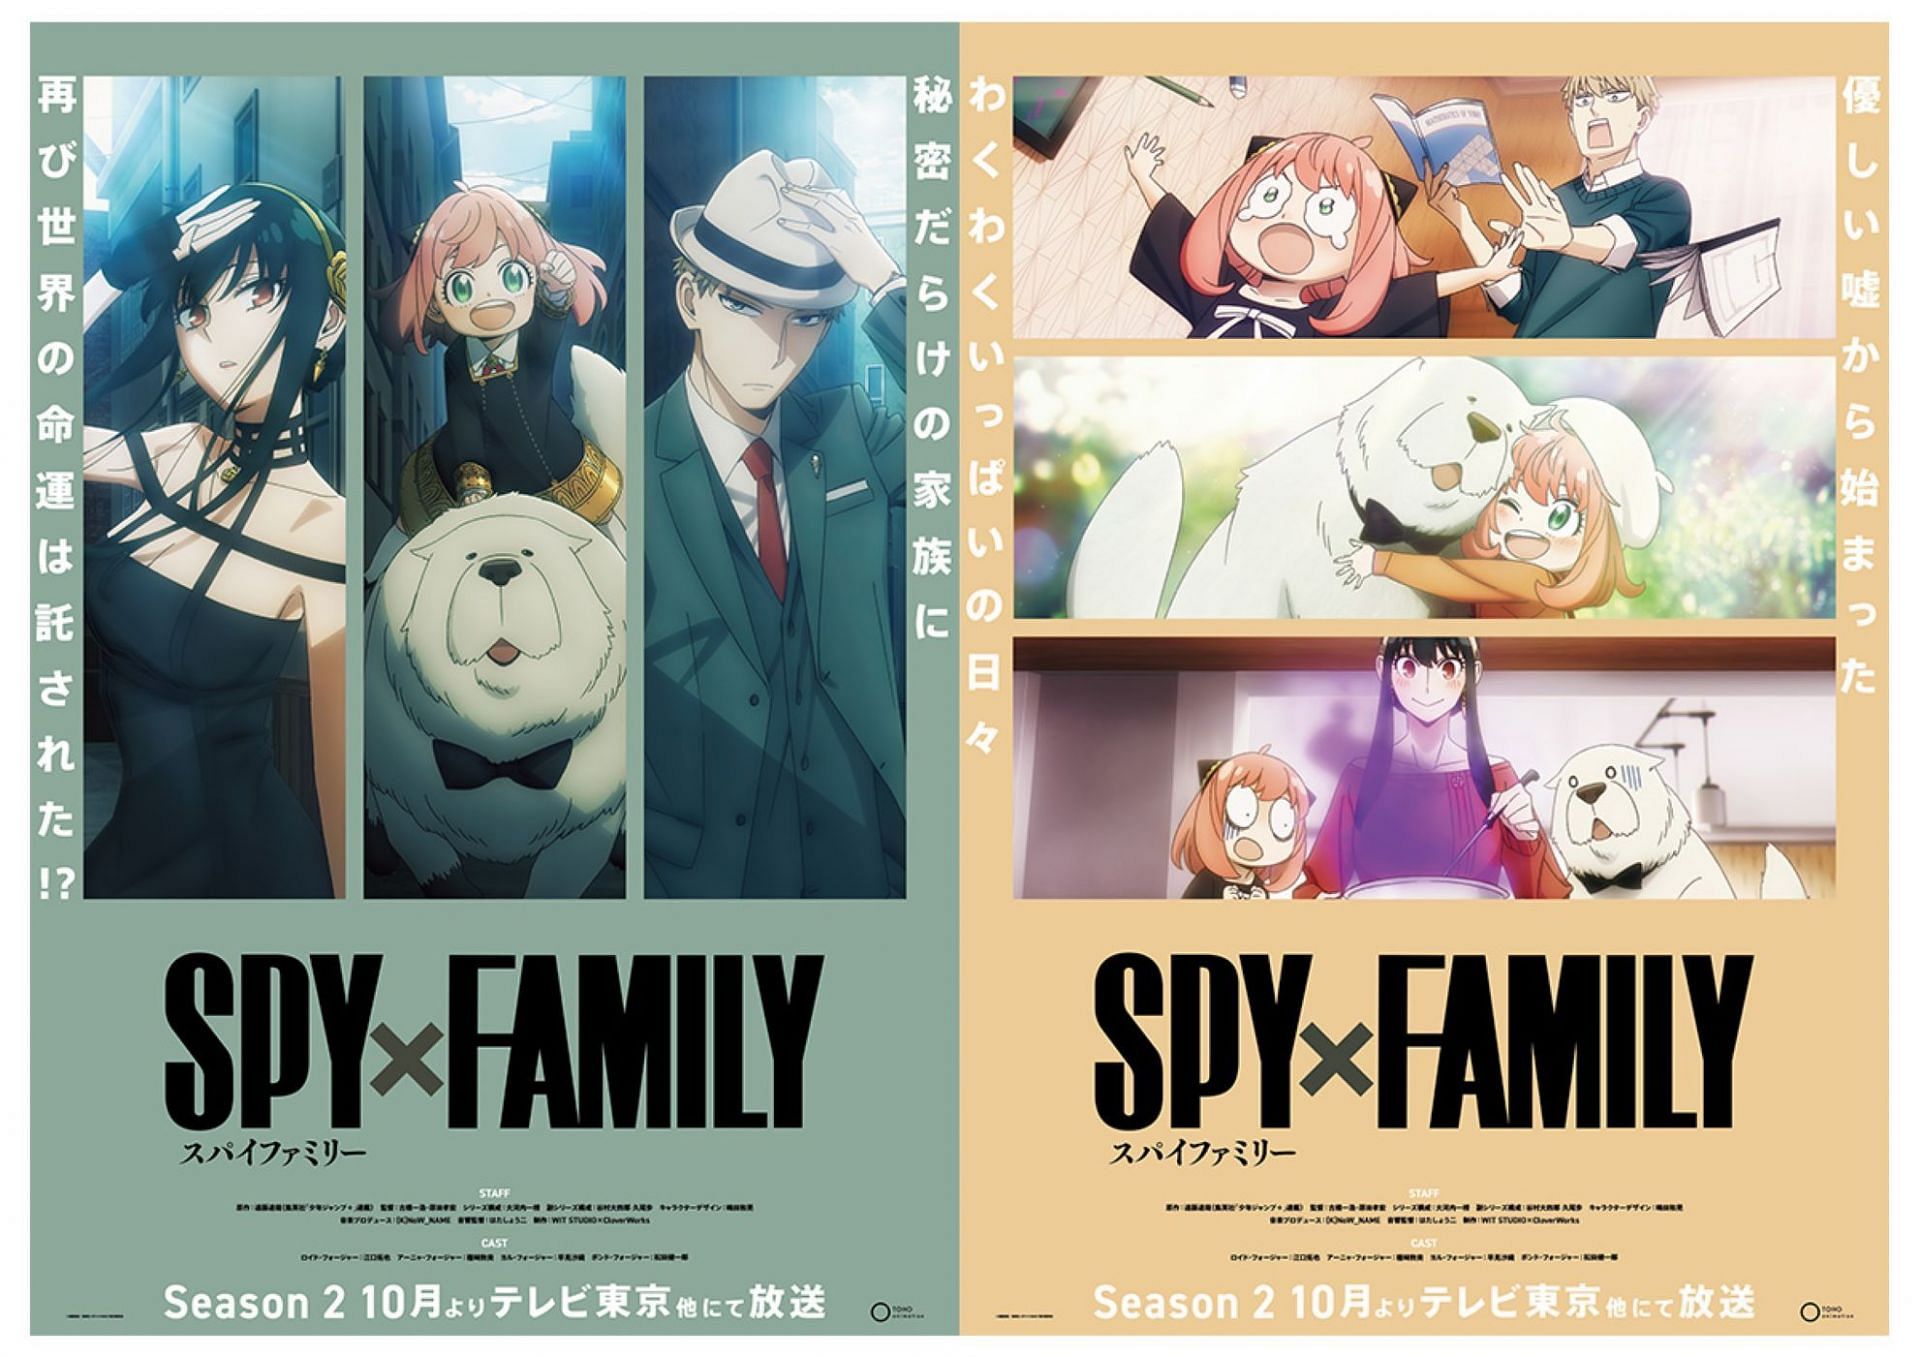 Spy x Family season 2 is coming to Crunchyroll in October - Polygon